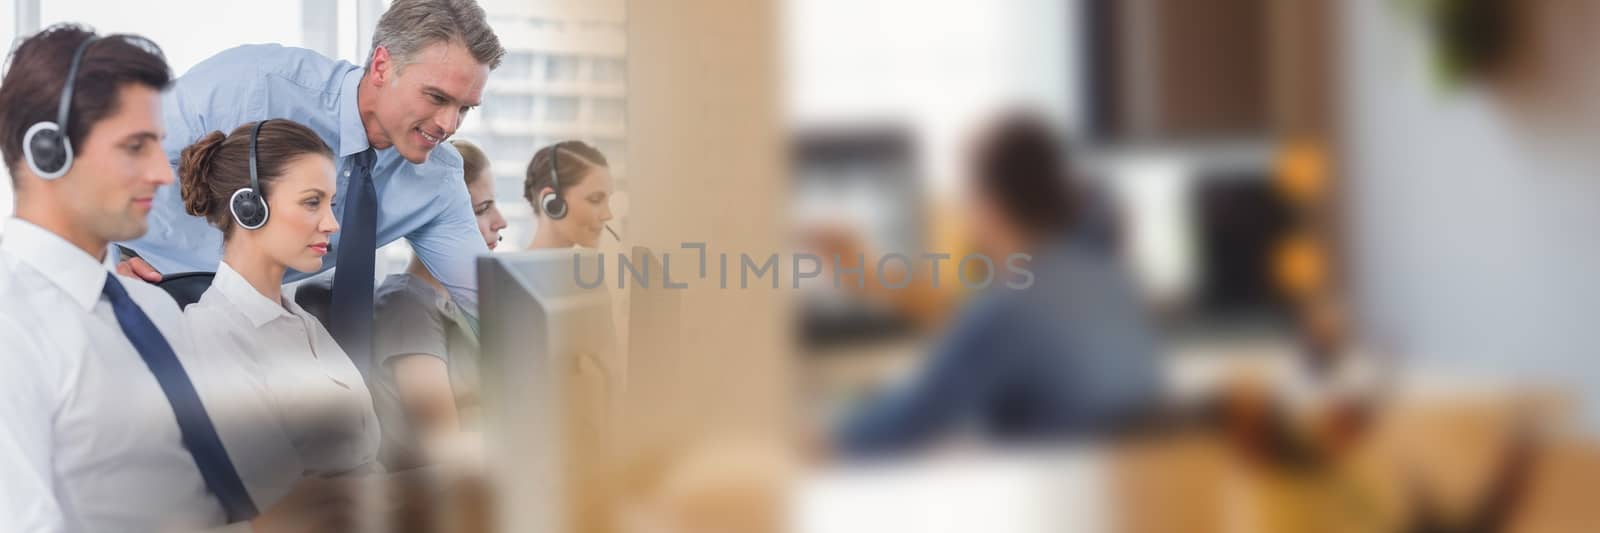 Call centre employees and blurry image of people at computer by Wavebreakmedia